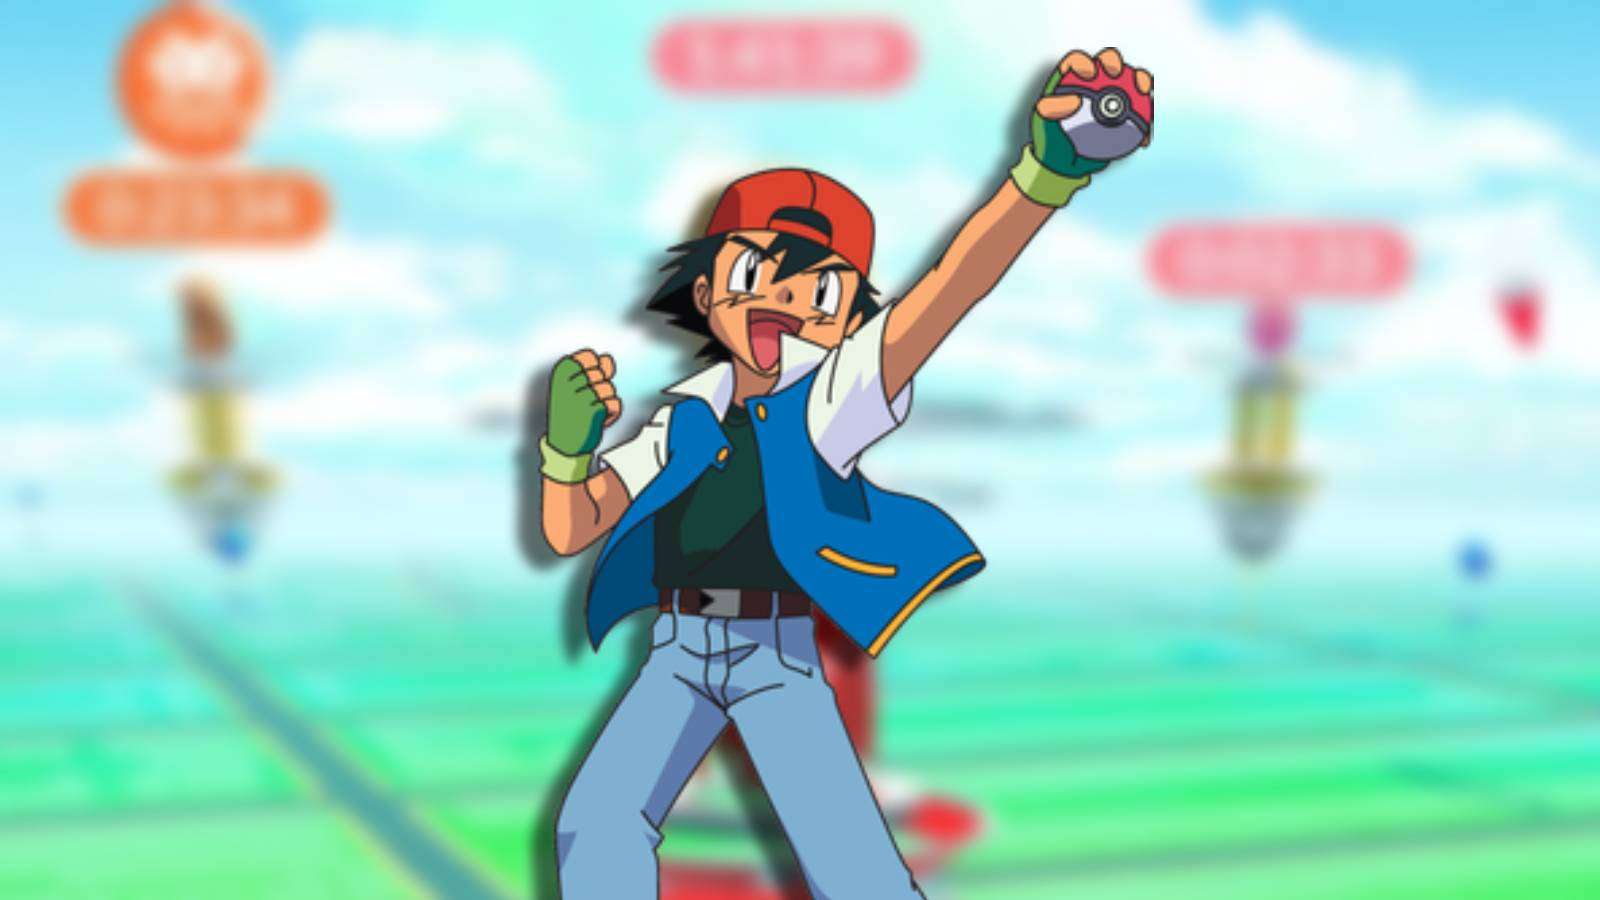 Ash Ketchum appears triumphant in front of a Pokemon Go Raid